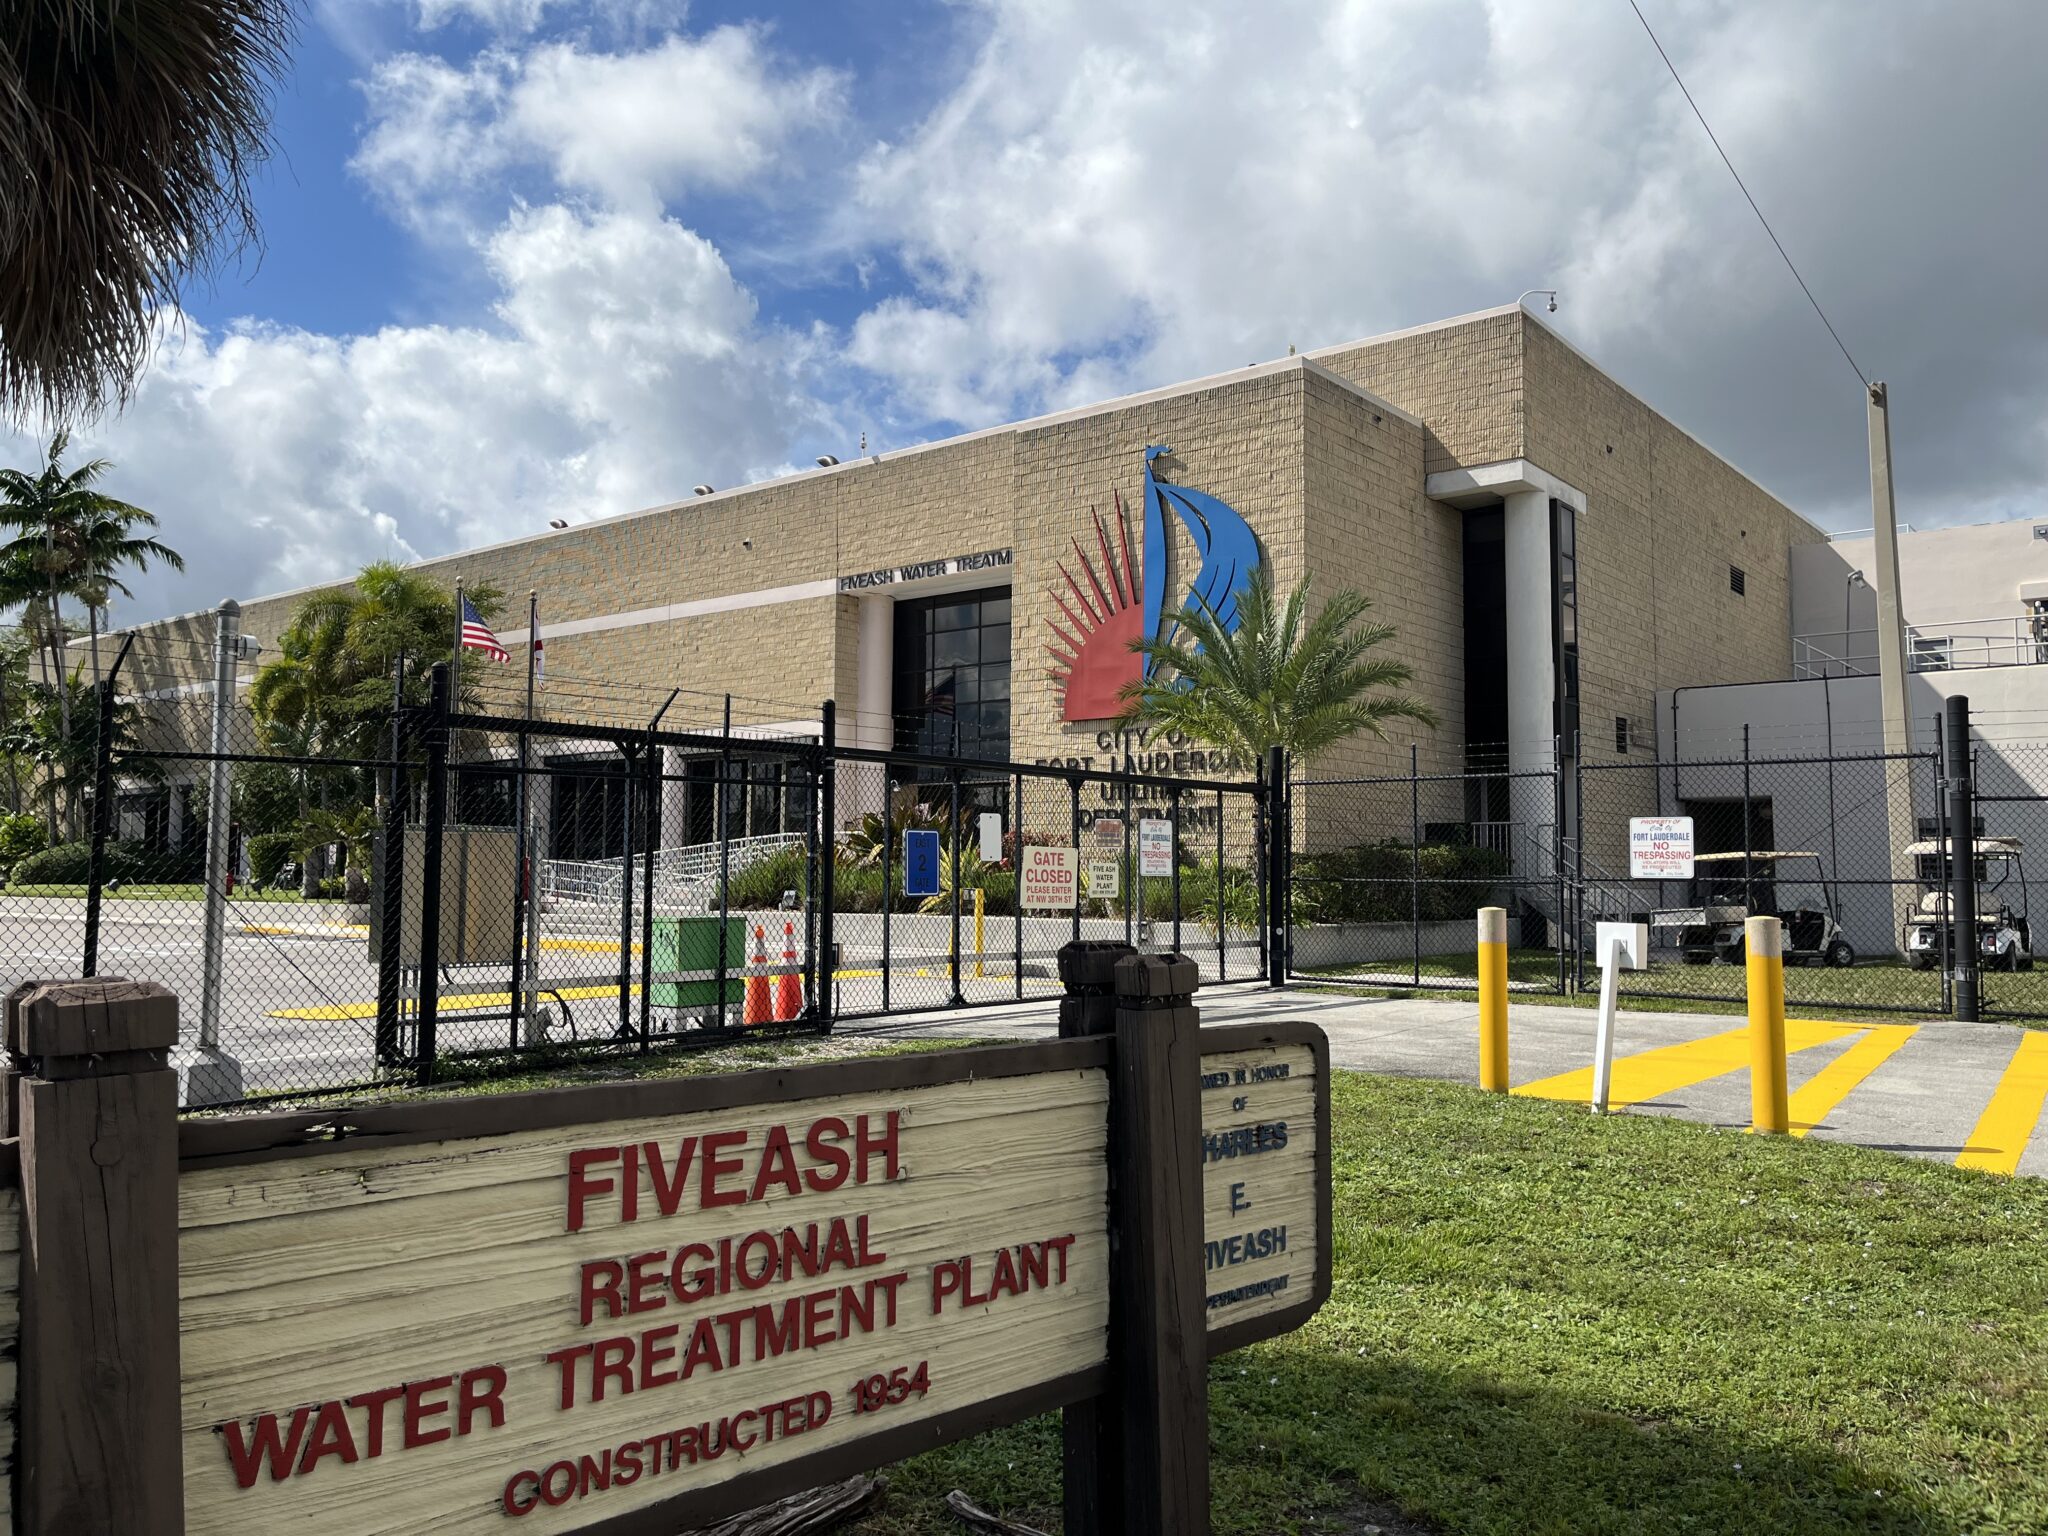 Sticker shock on way: Fort Lauderdale water rates may nearly double by 2025 to pay for new treatment plant - NewsBreakThat water flowing from th...